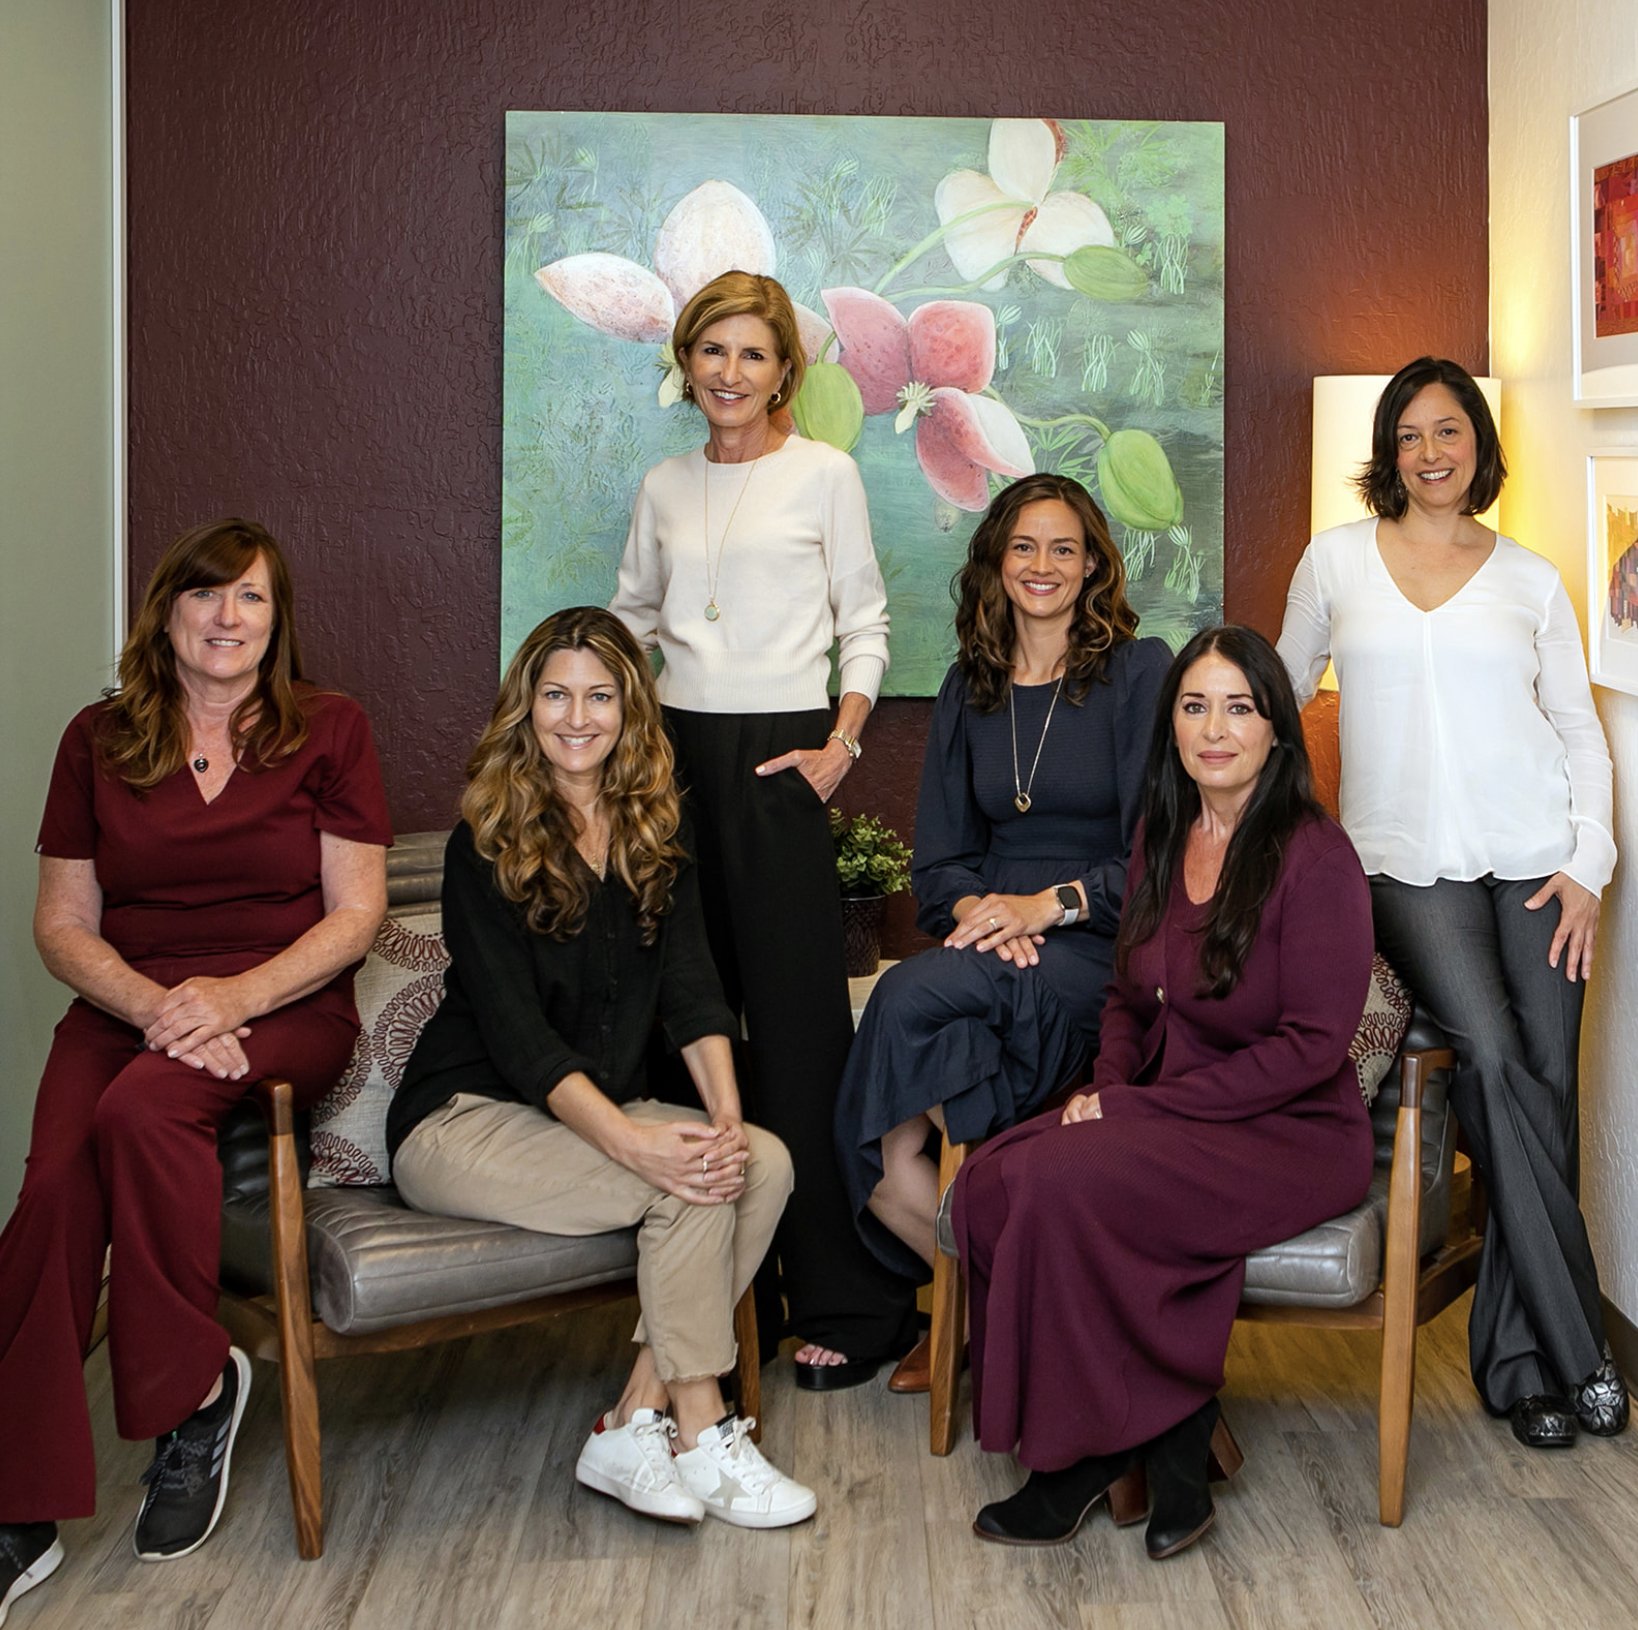 Our Natural Wellness Team | Naturopathy, Acupuncture, Wellness Coaching ...